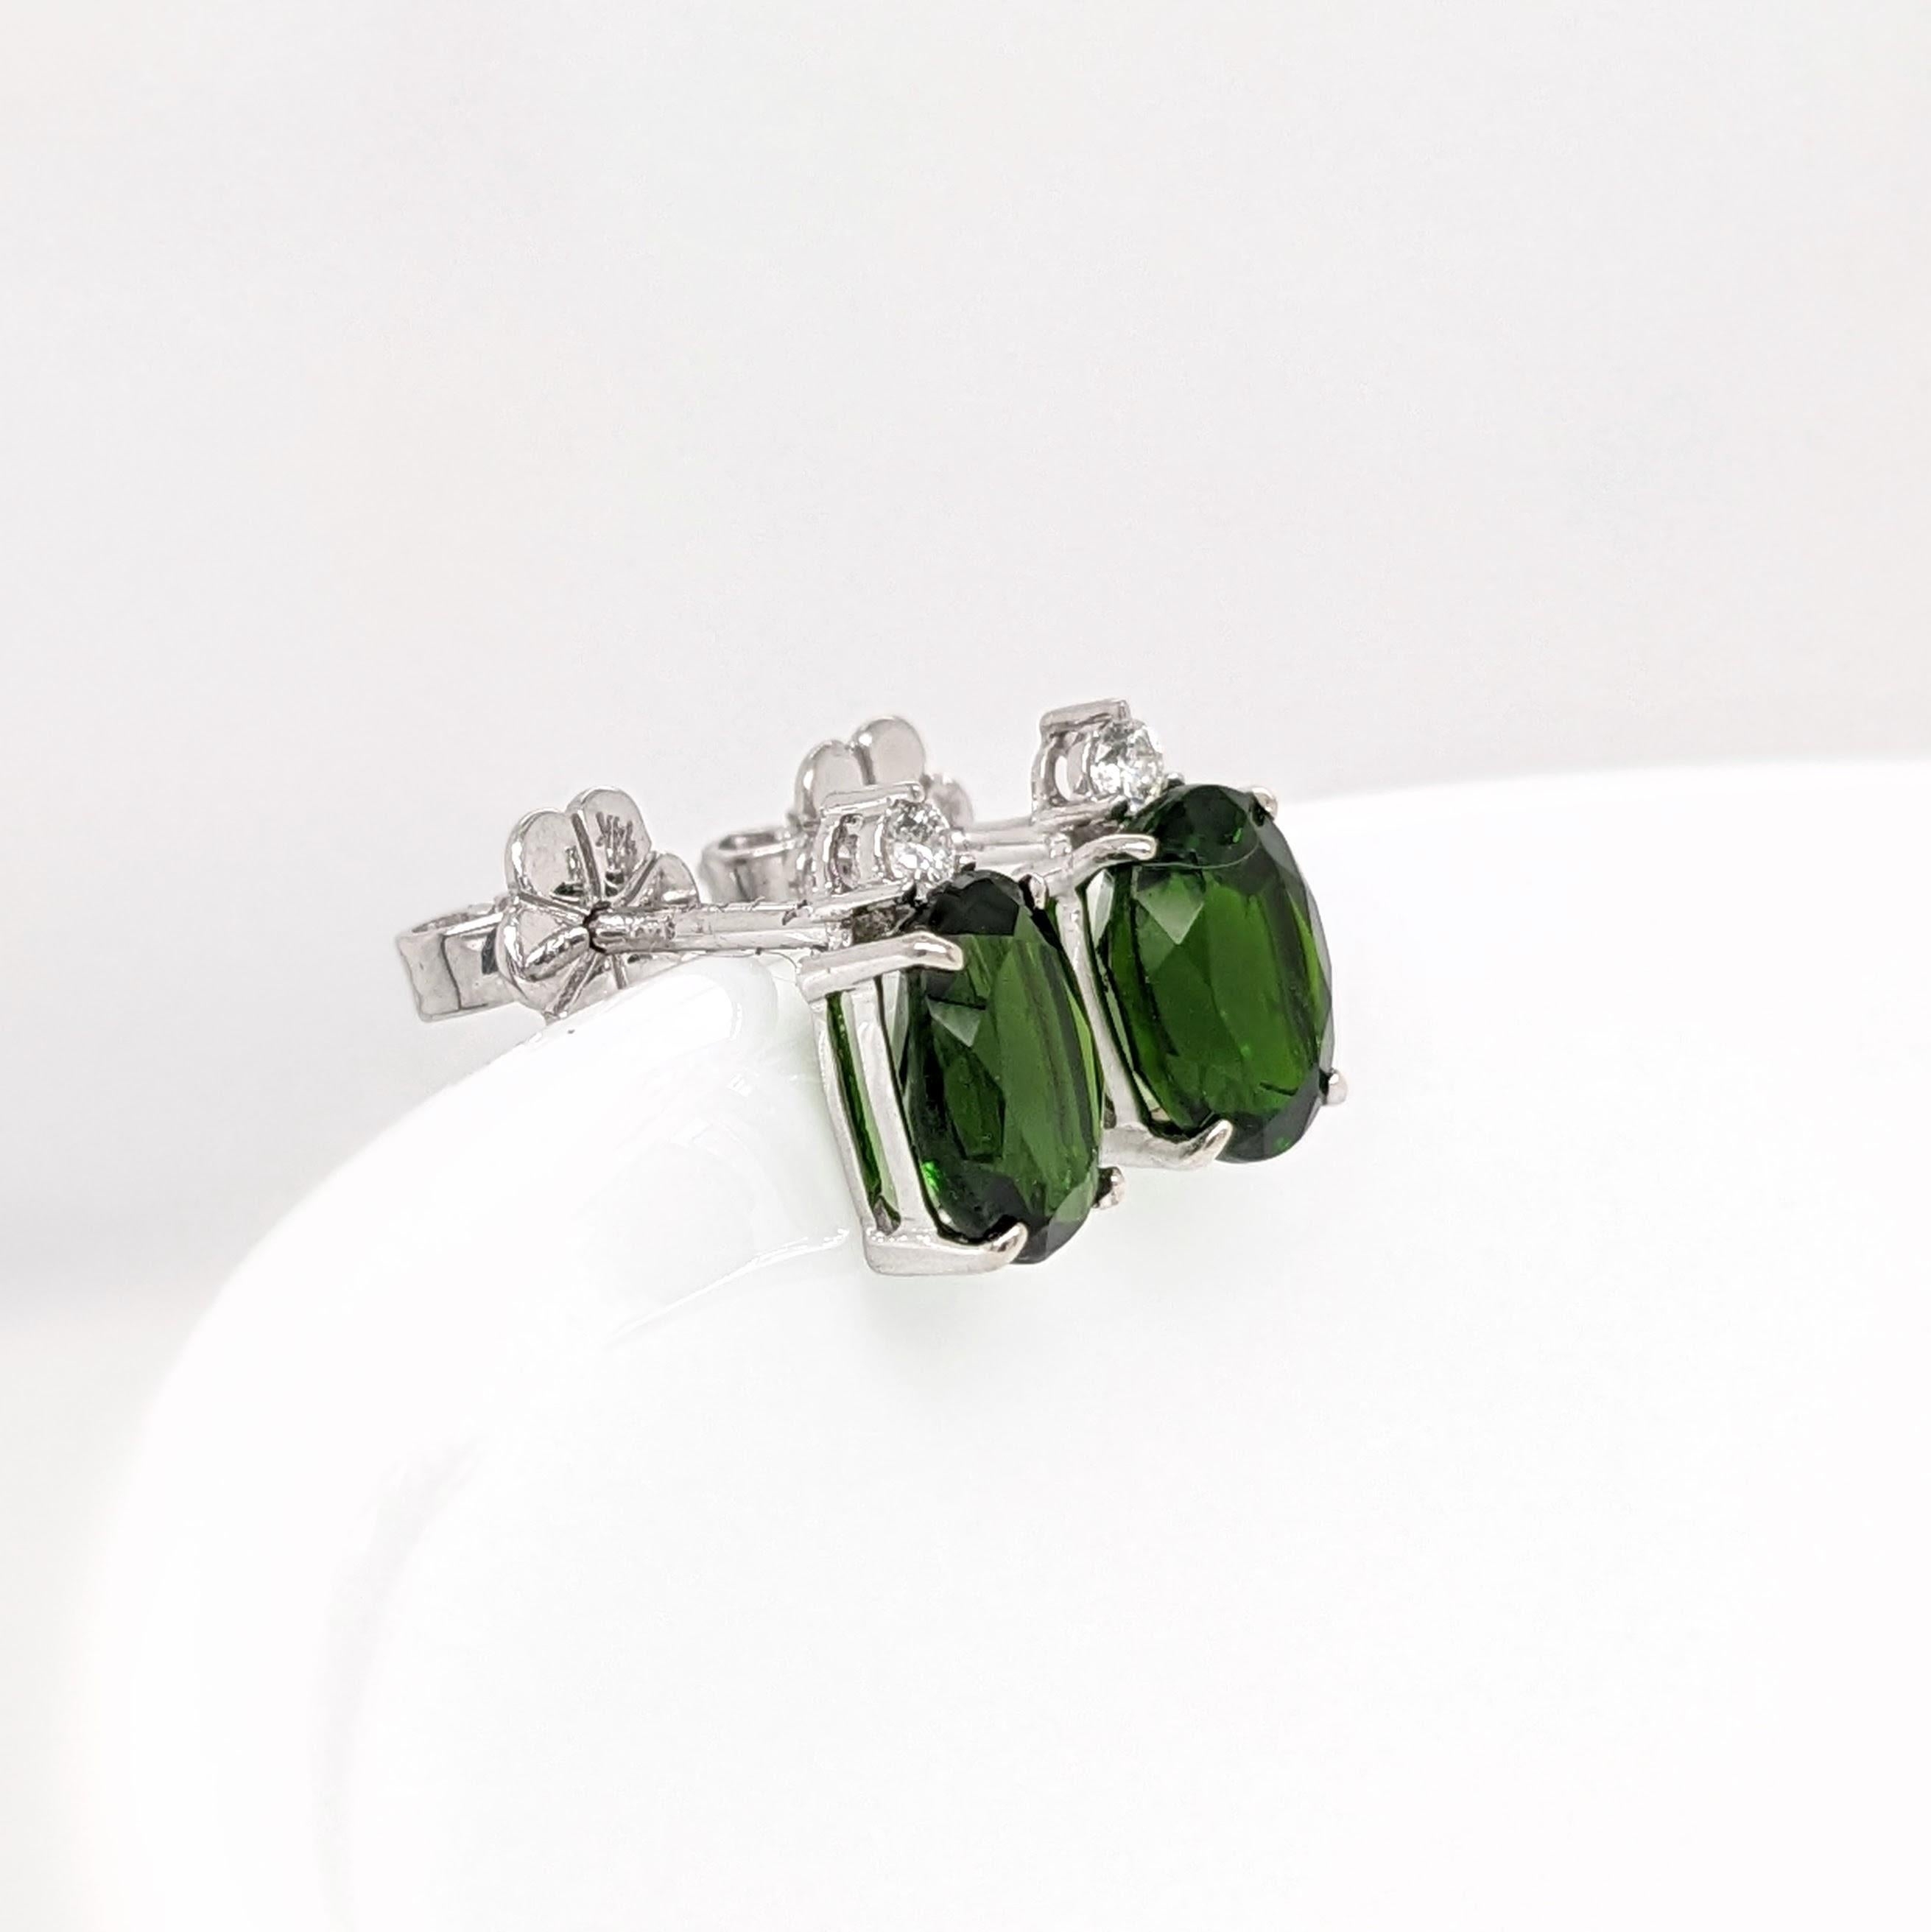 Oval Cut 2.6ct Chrome Diopside Earrings w Natural Diamonds in Solid 14K Gold Oval 7x5mm